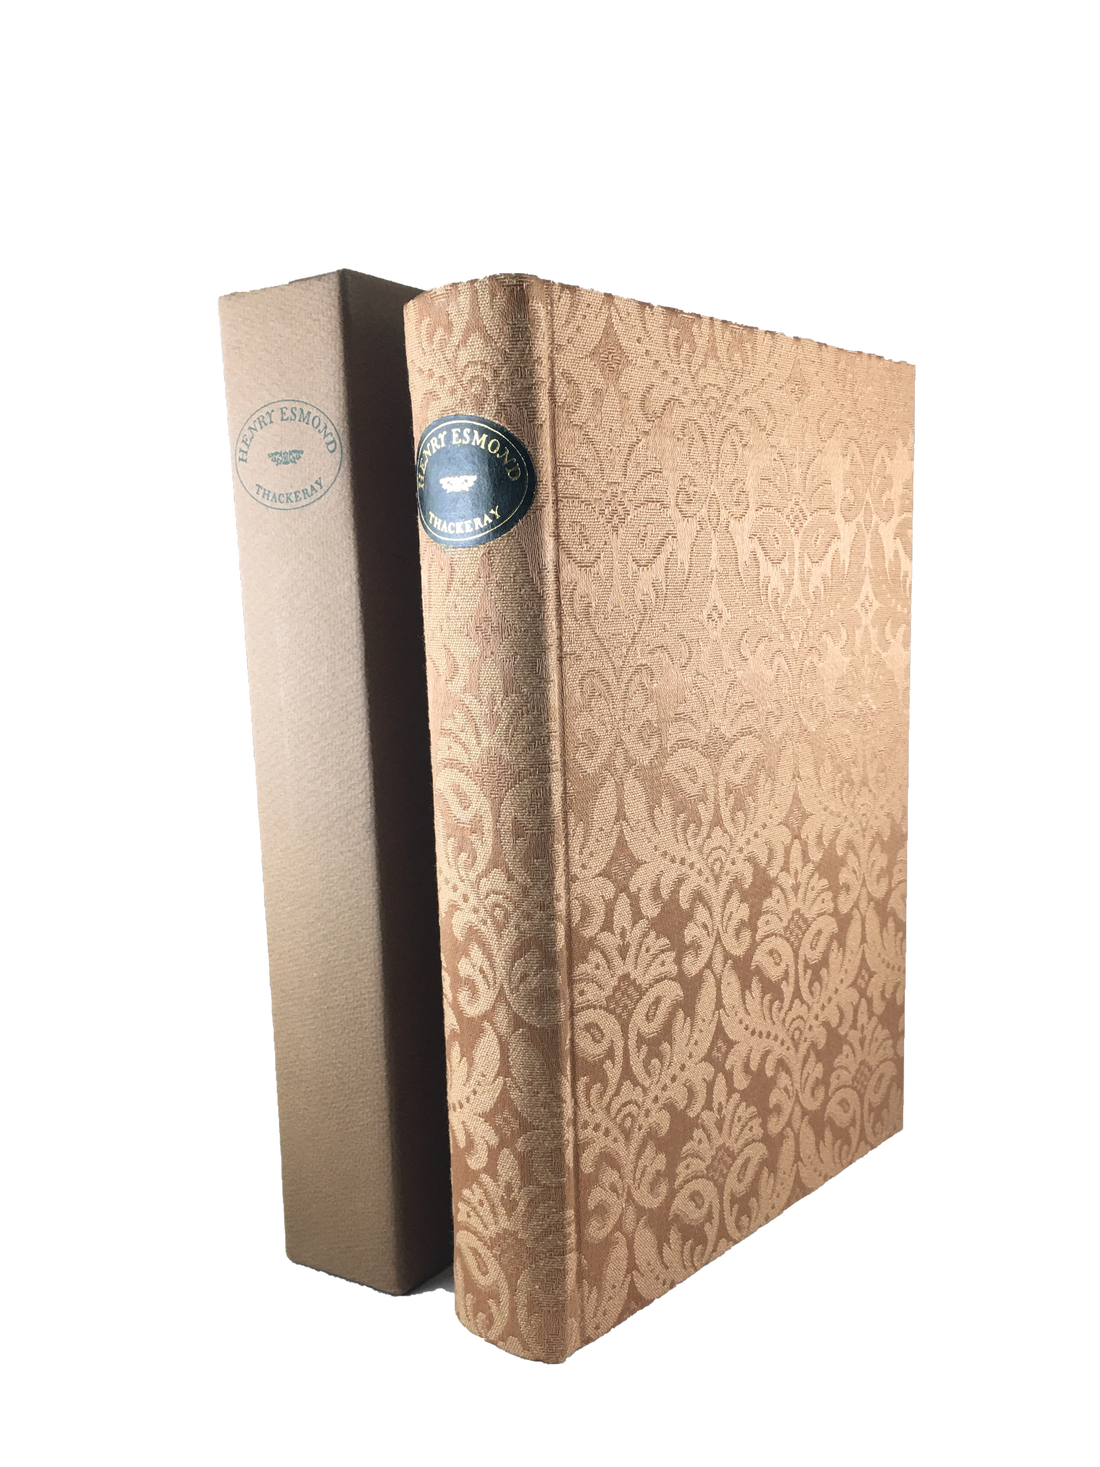 The History of Henry Esmond by William Makepeace Thackeray published by The Limited Editions Club available for purchase on online bookstore